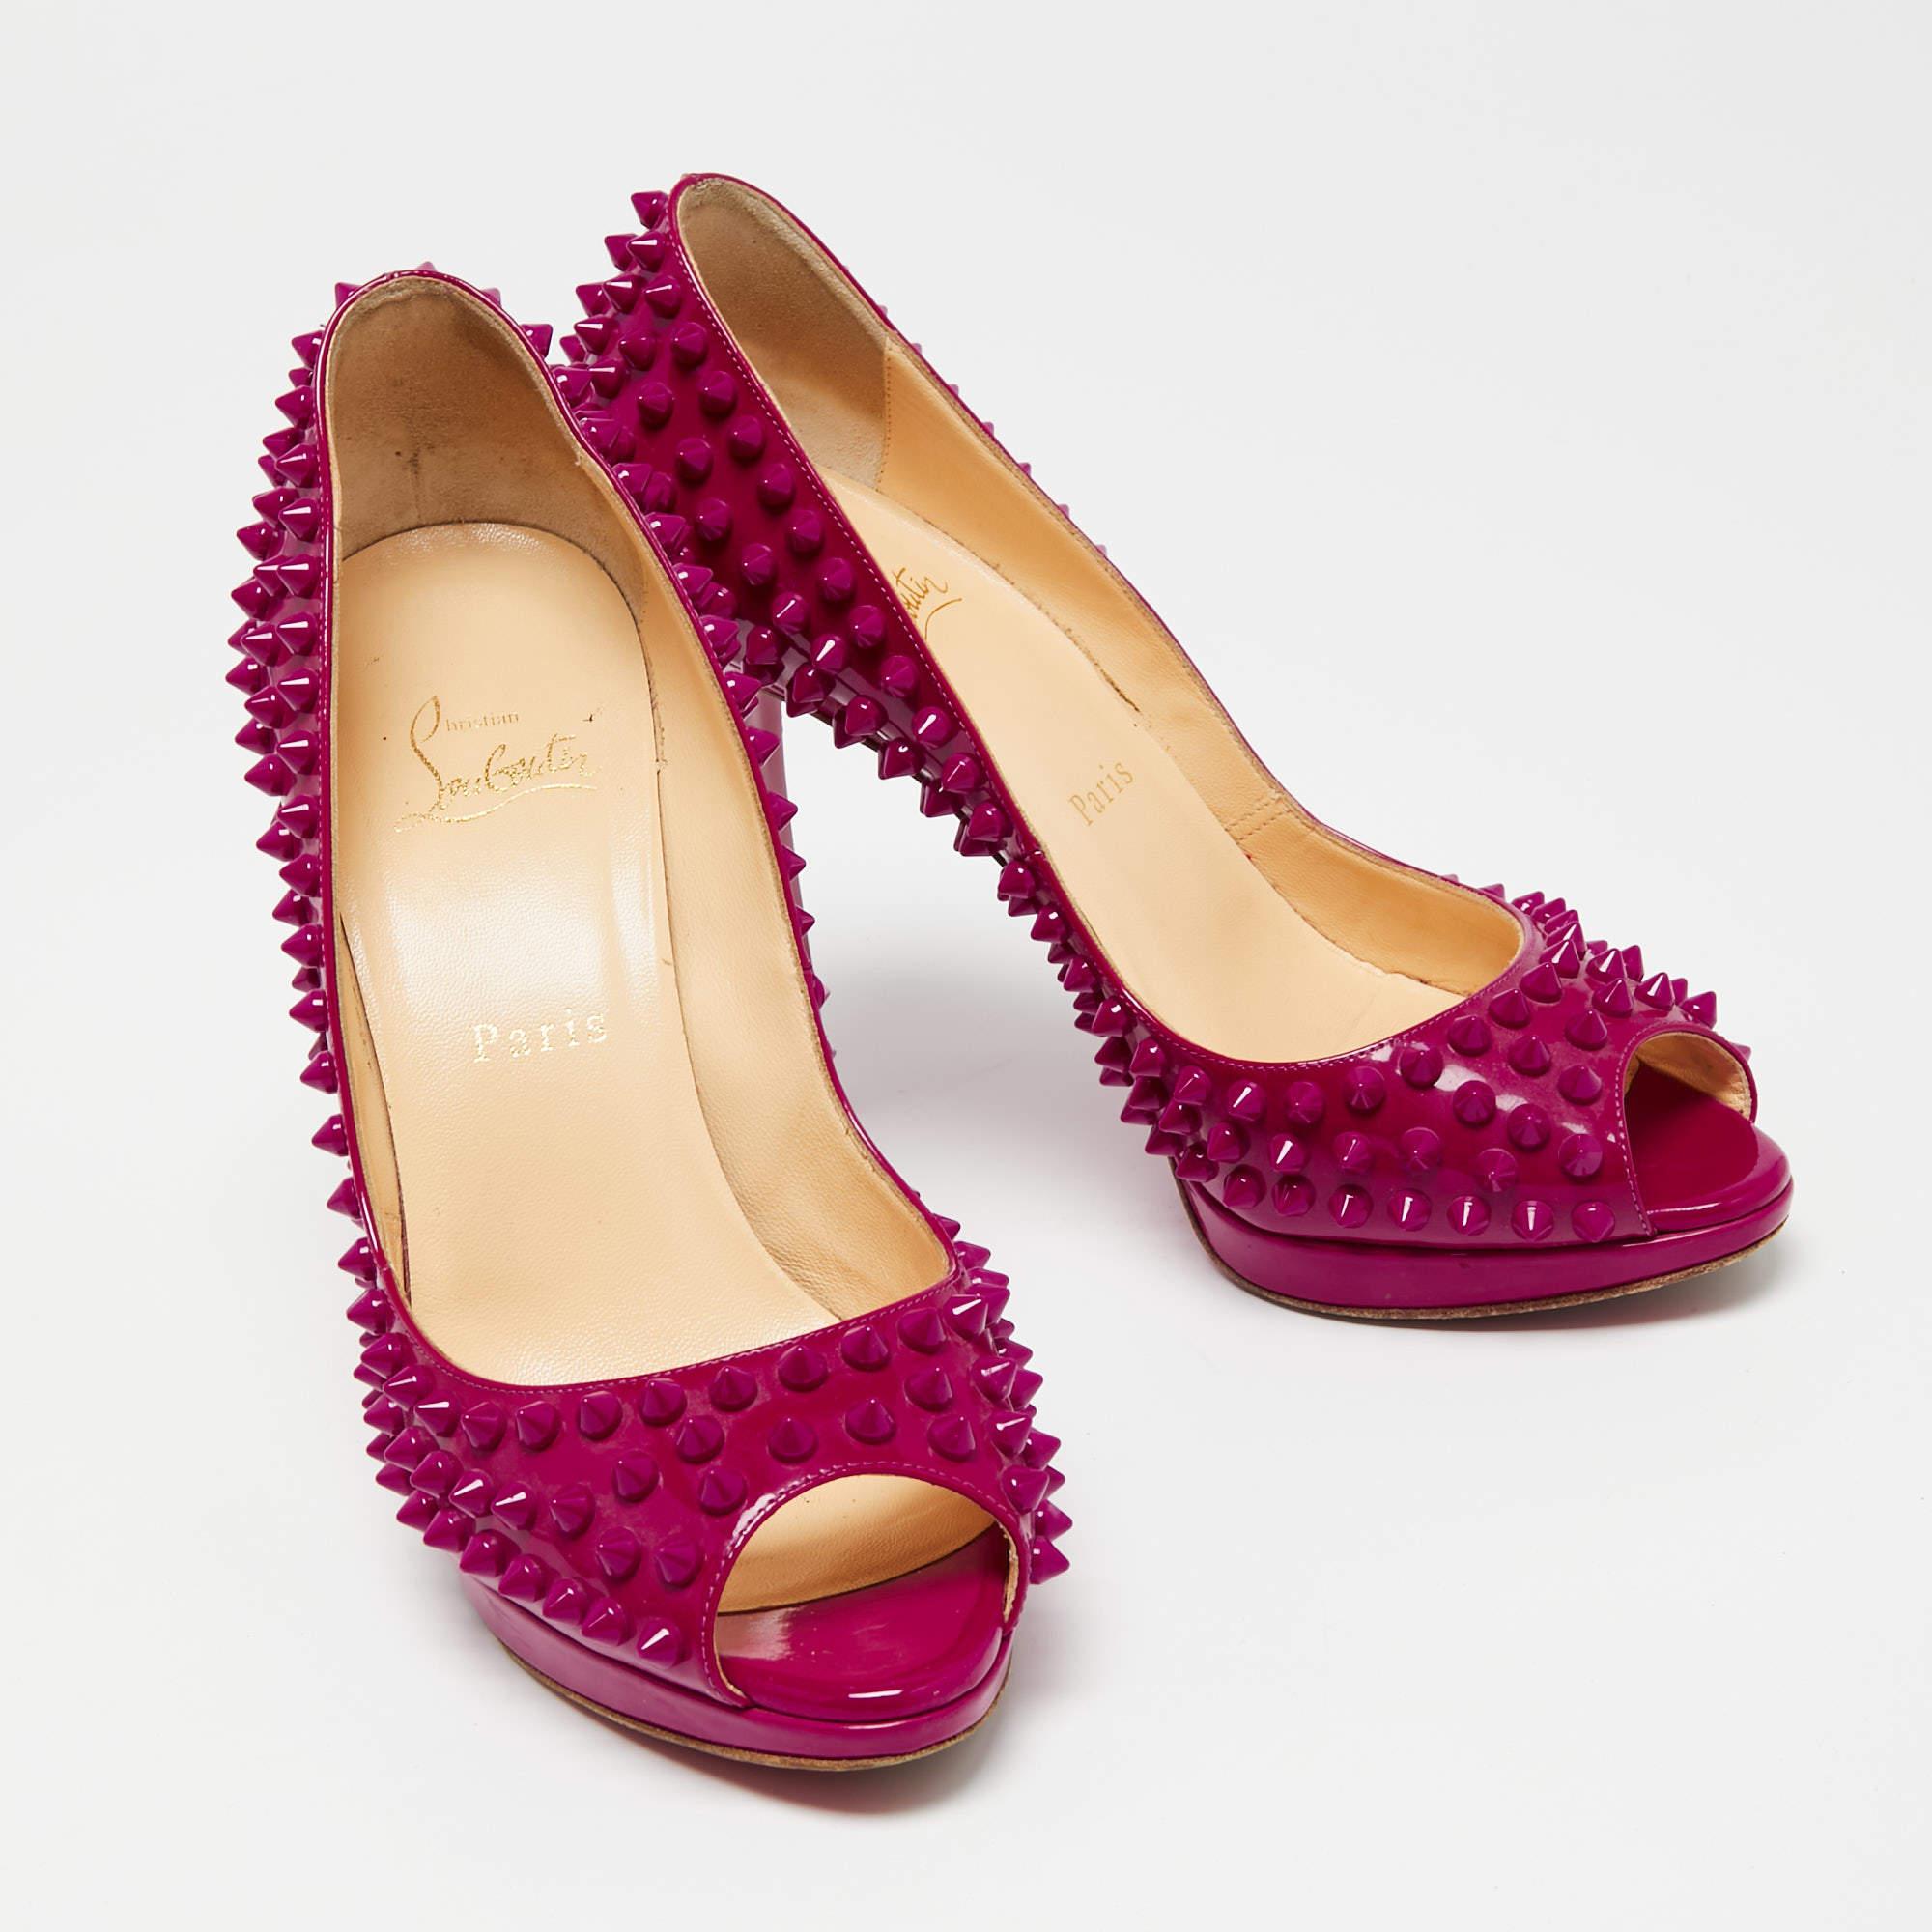 Christian Louboutin Hot Pink Patent Yolanda Spiked Peep-Toe Pumps Size 38.5 For Sale 1